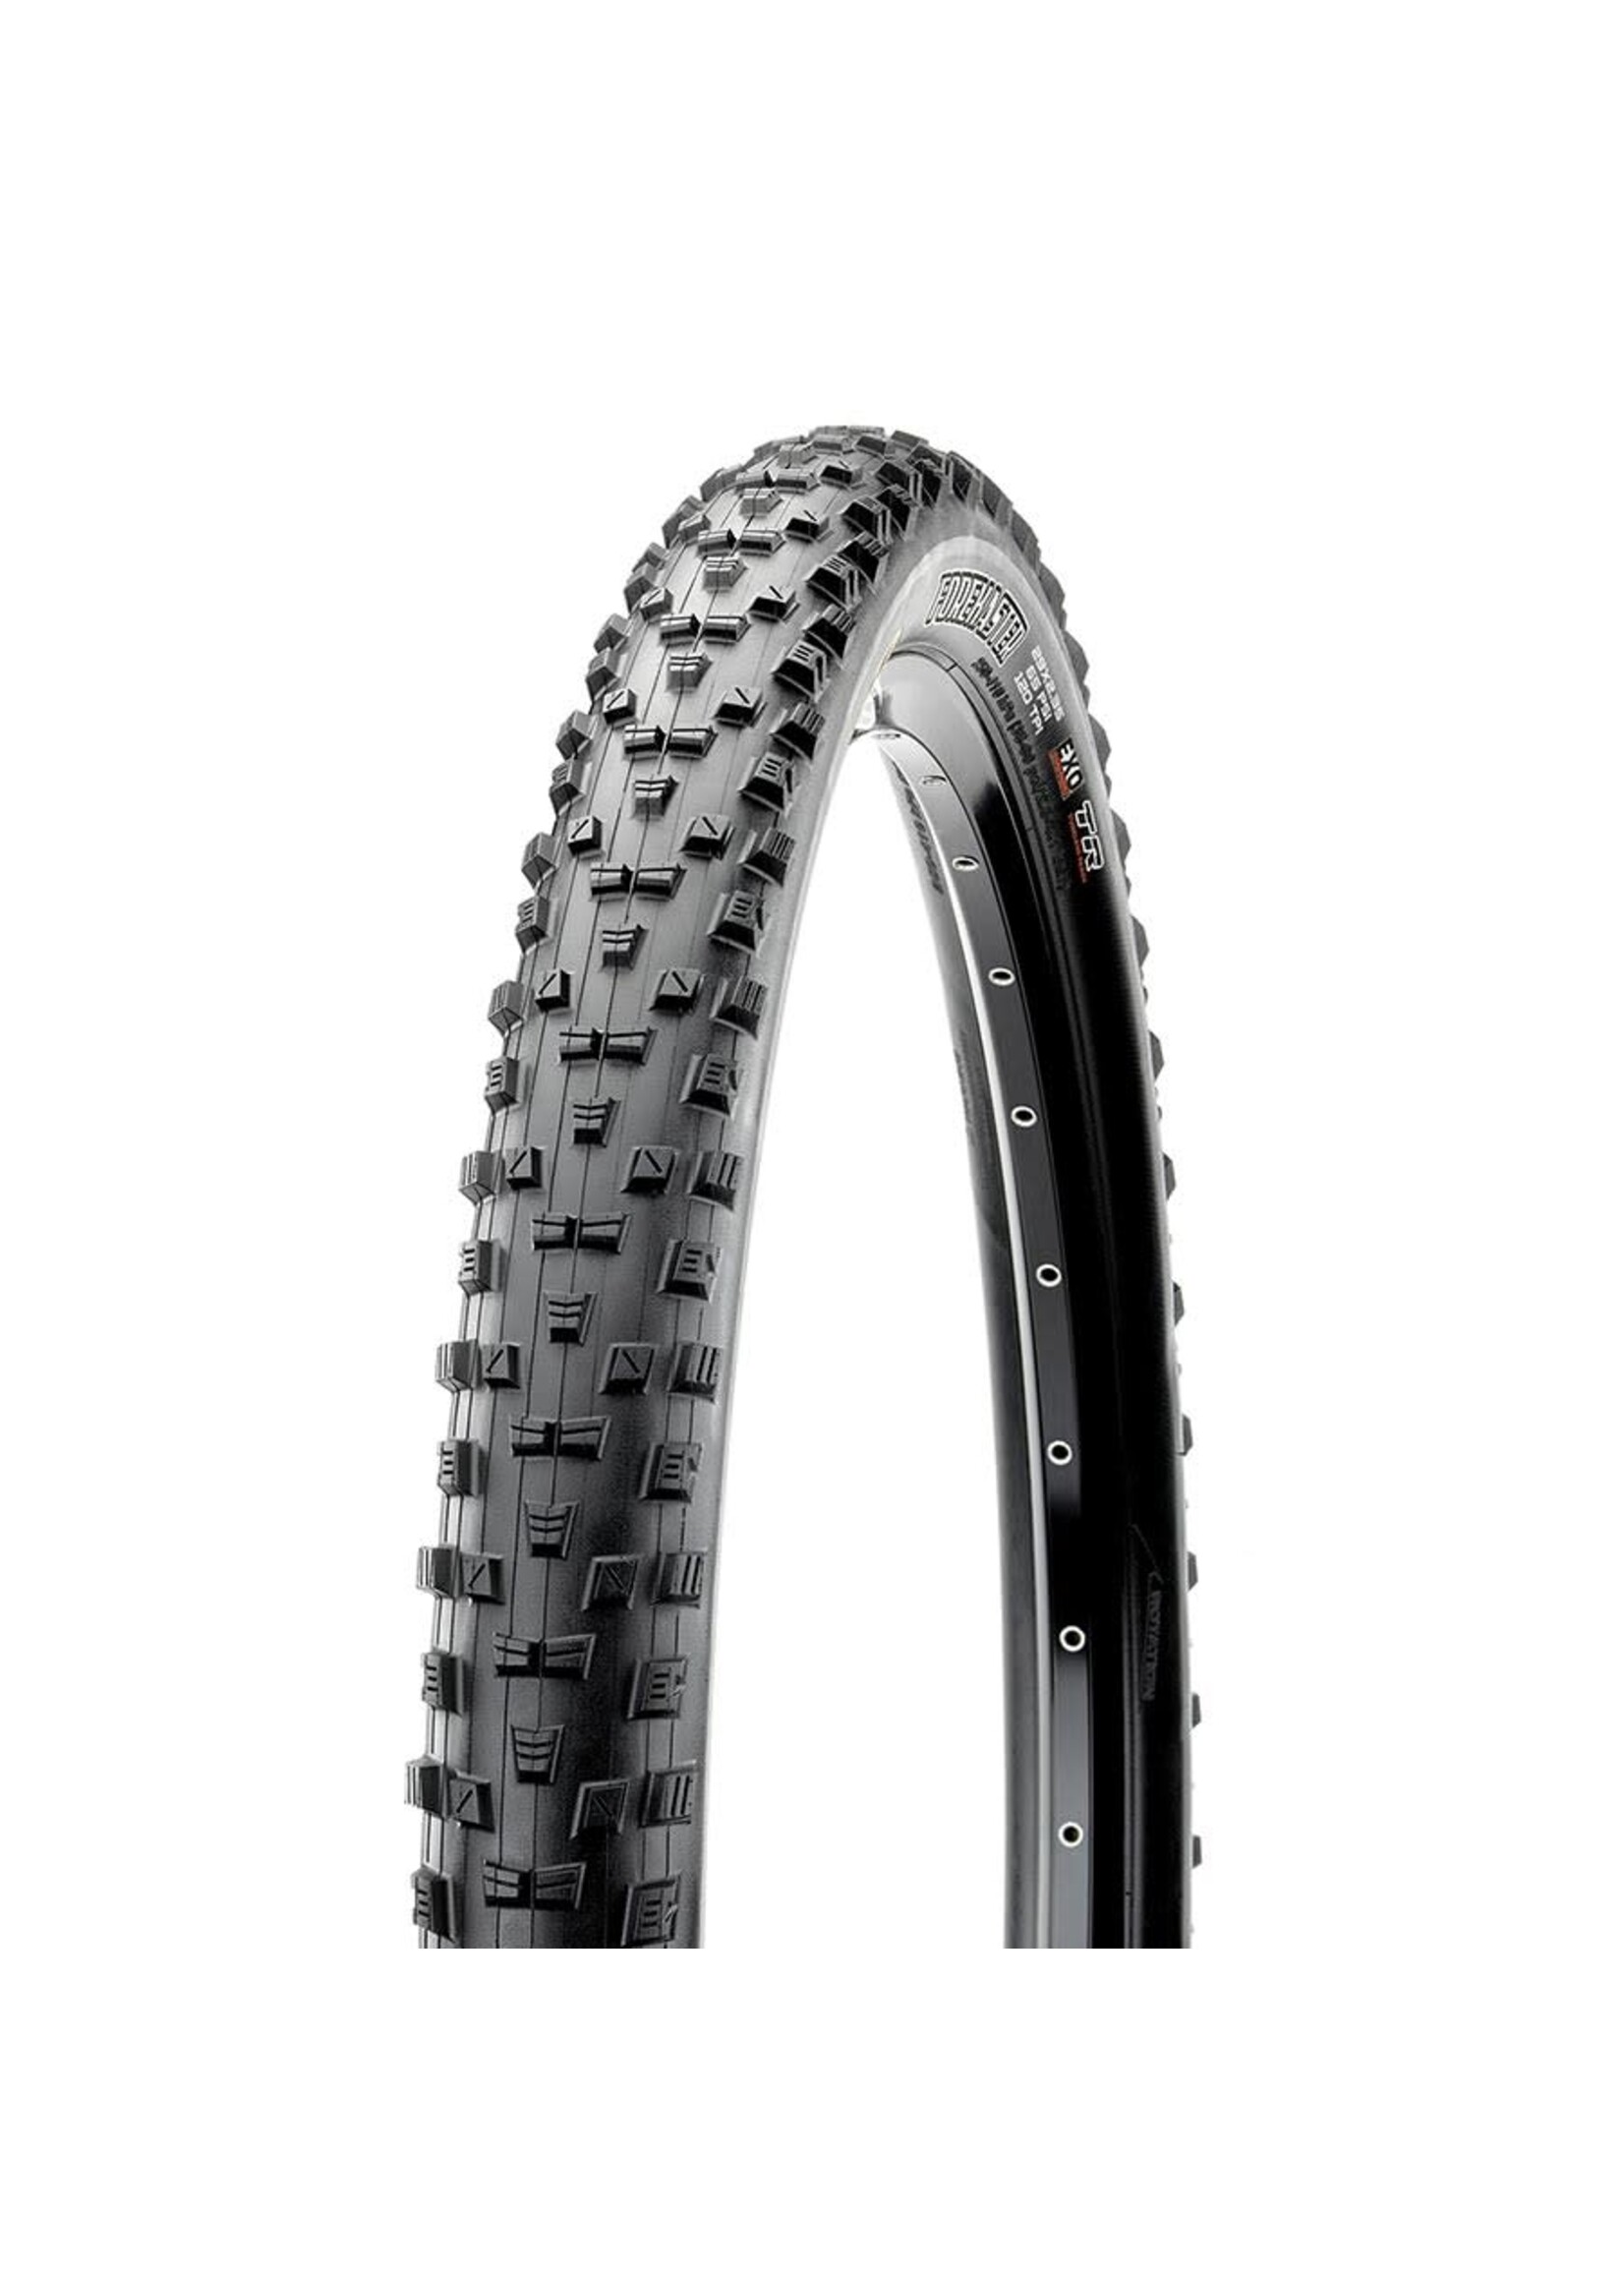 TIRE- MAXXIS FOREKASTER 29 X 2.35 WIRE CLINCHER